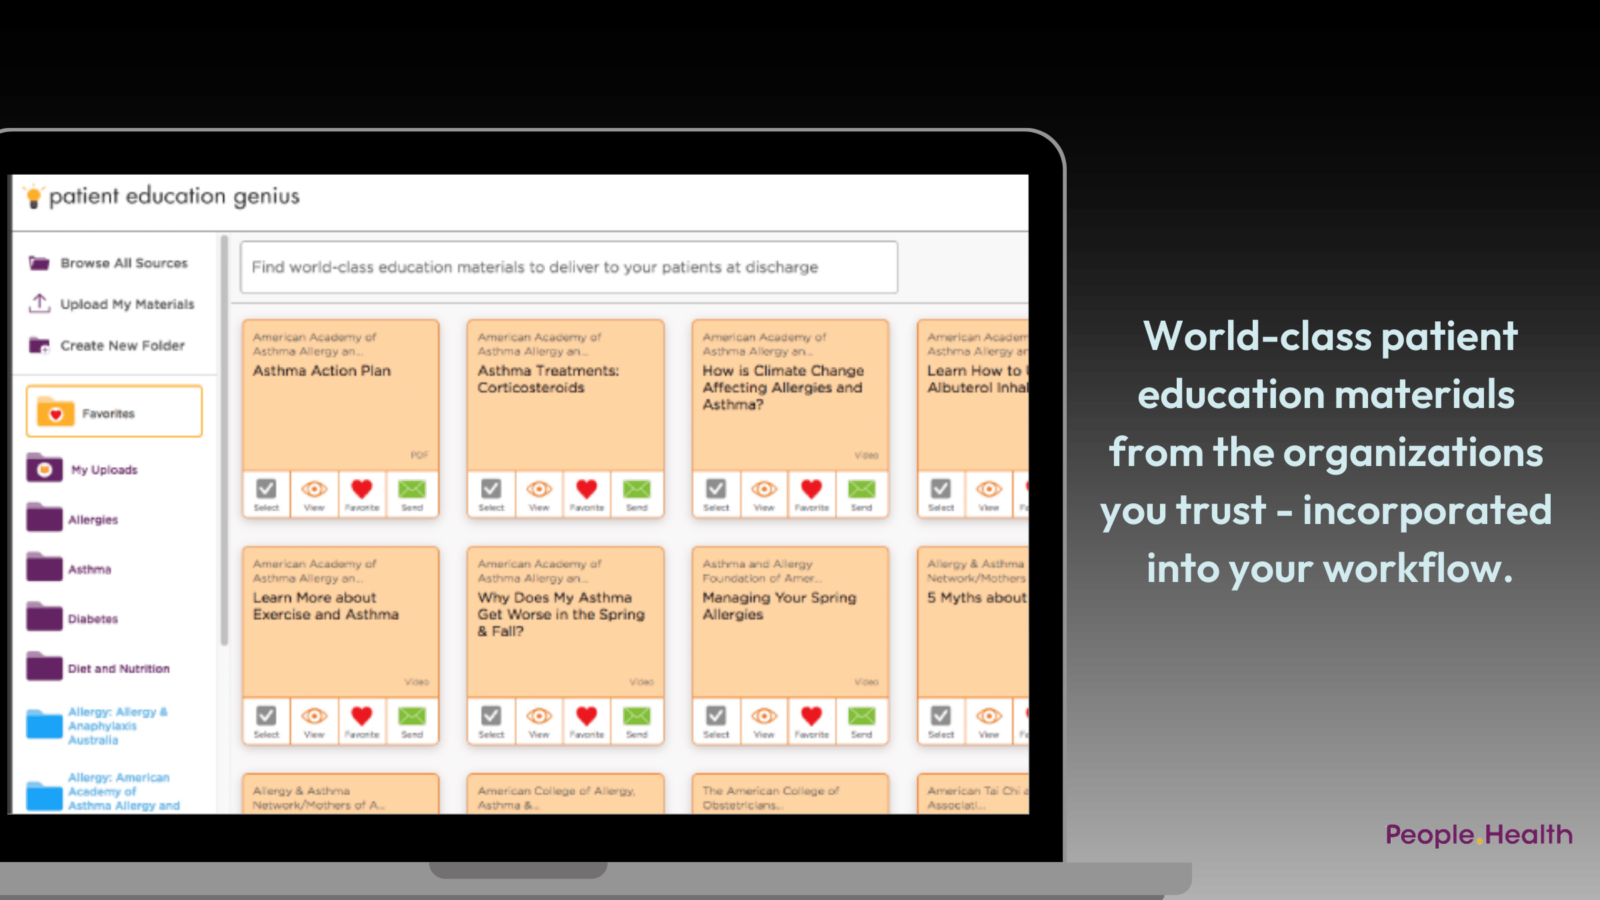 World-class patient education materials from the organizations you trust--incorporated into your workflow.